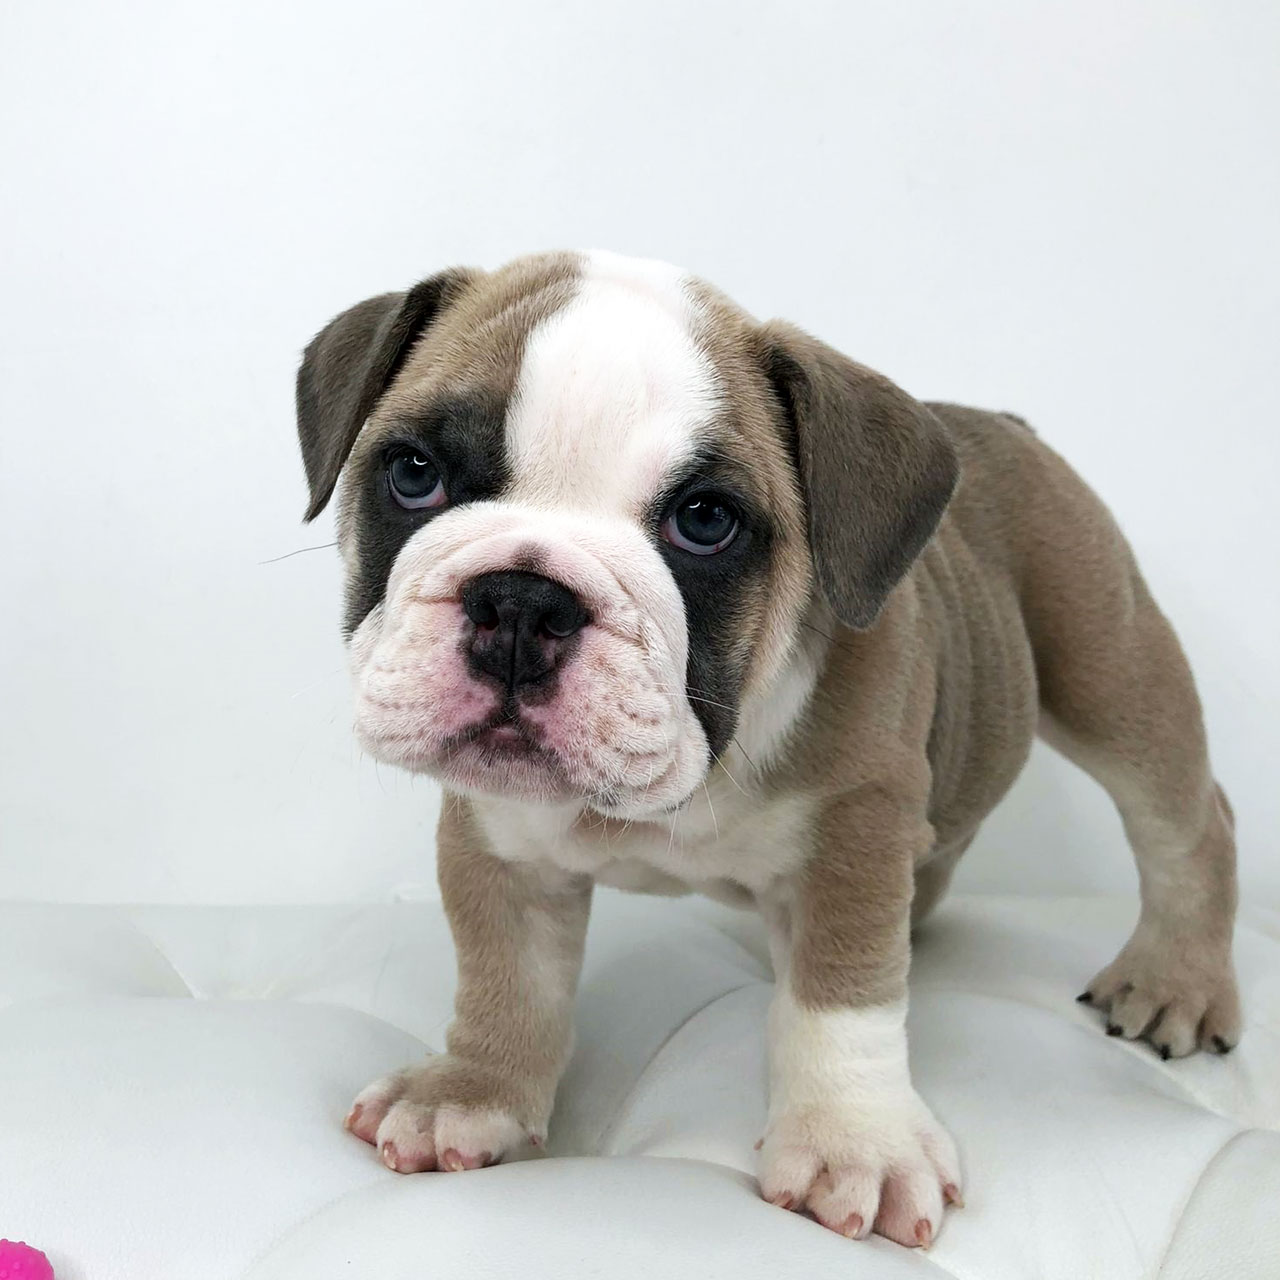 English Bulldog Financing Adorable Puppies for Sale Near Me - PuppiesToGoInc.com, Puppy for sale near me, puppies for sale, dog for sale, dogs for sale, dog for sale near me, pet for sale, dogs for sale cheap, cheap puppies for sale near me, forever love puppies, cheap puppies for sale, cute puppies for sale